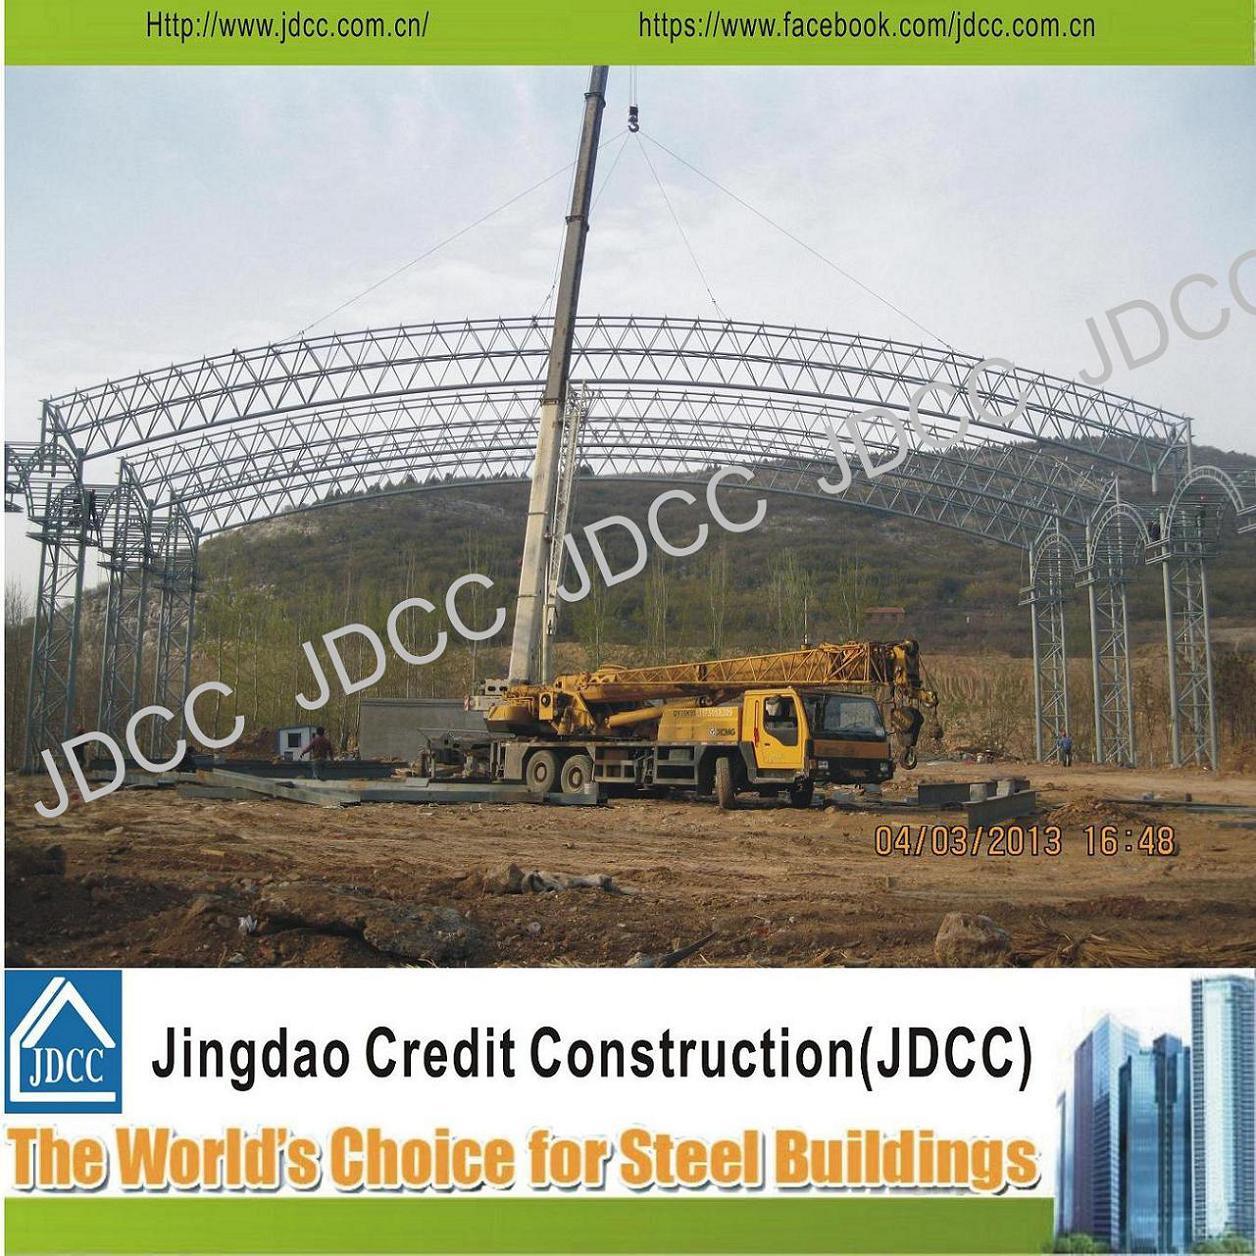 Construction Light Steel Shade Structure